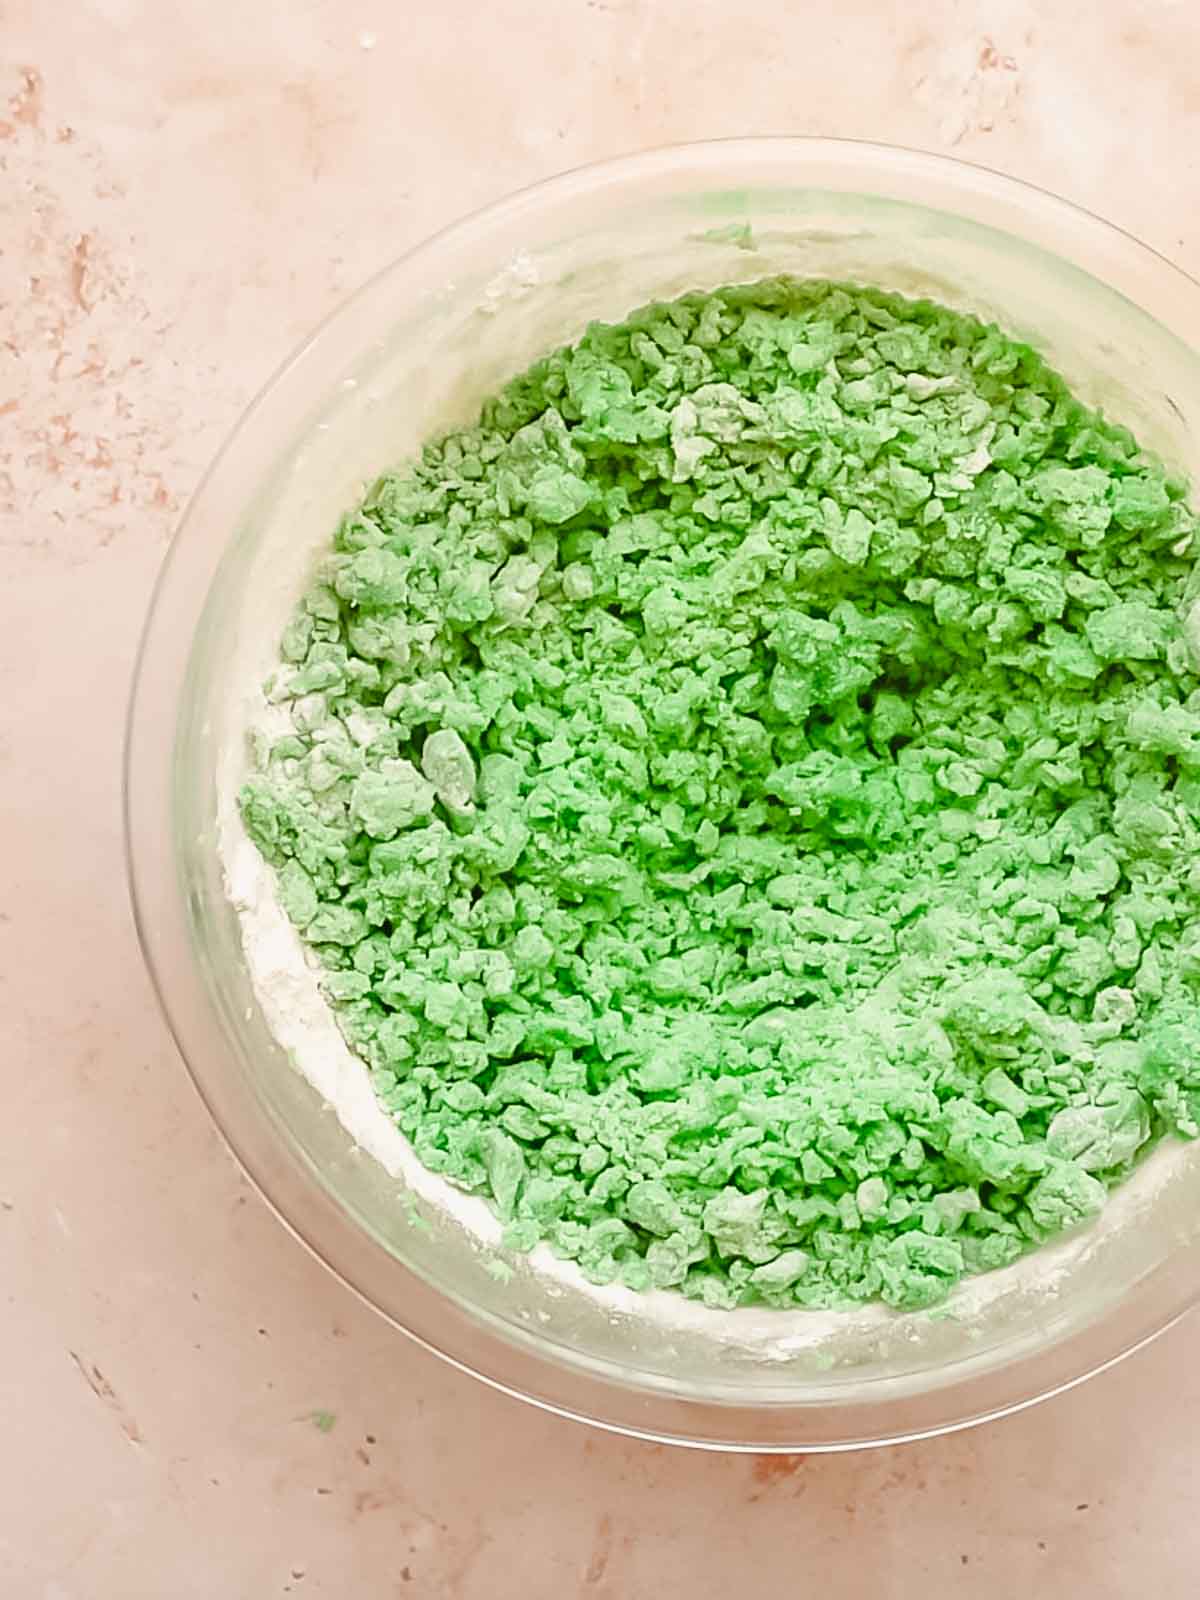 Green cookie dough in a bowl with flour being mixed in.